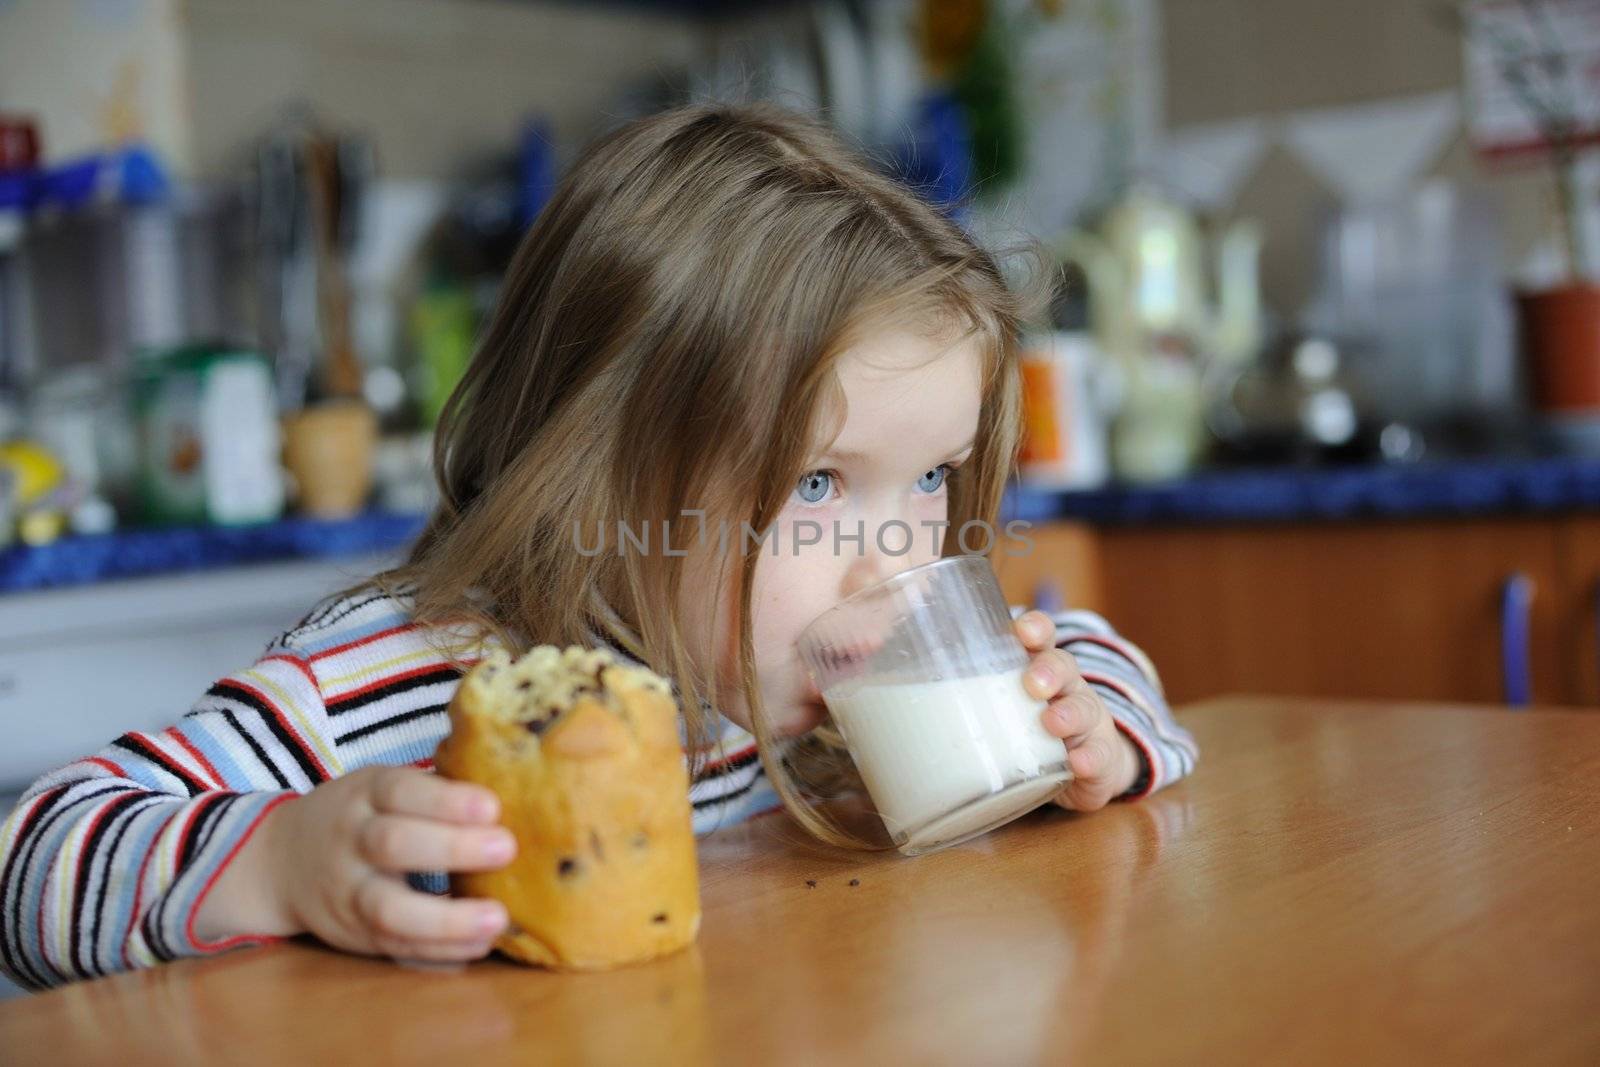 An image of a girl eating cookie with milk